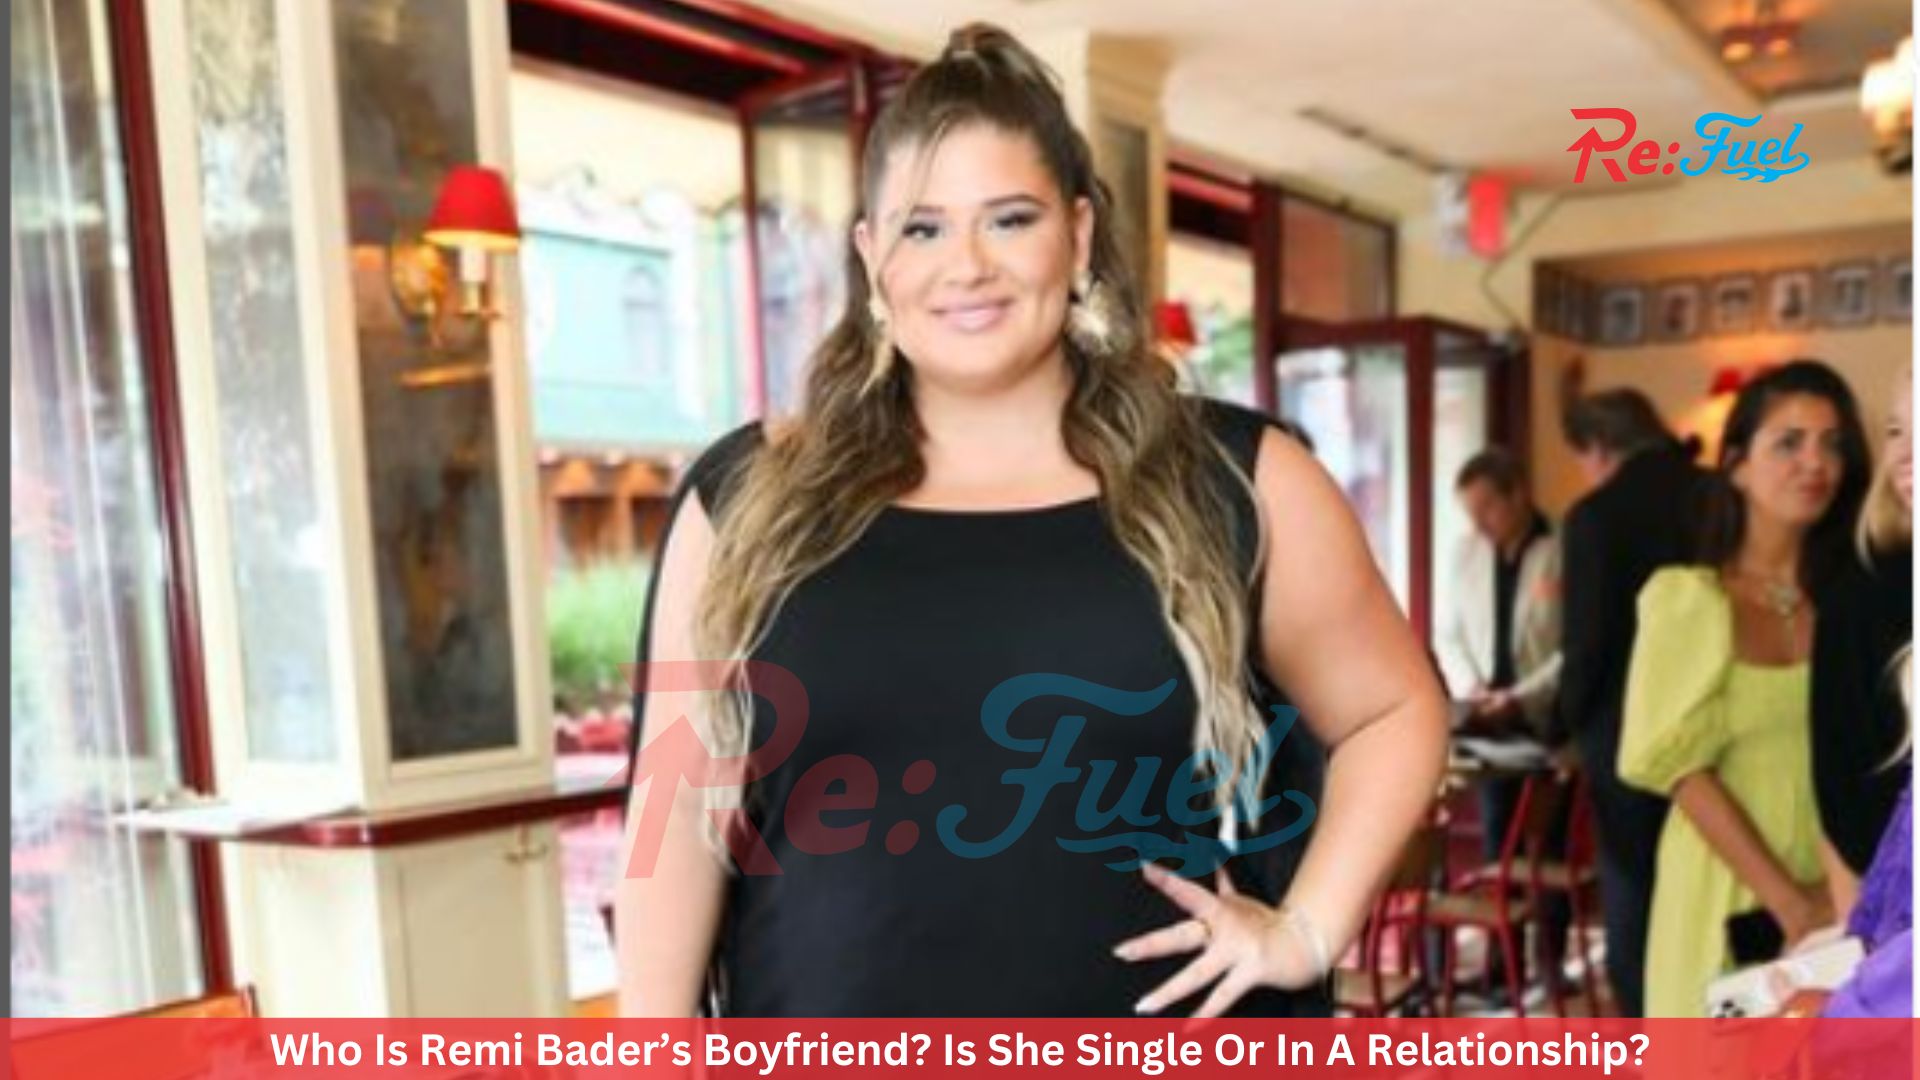 Who Is Remi Bader’s Boyfriend? Is She Single Or In A Relationship?